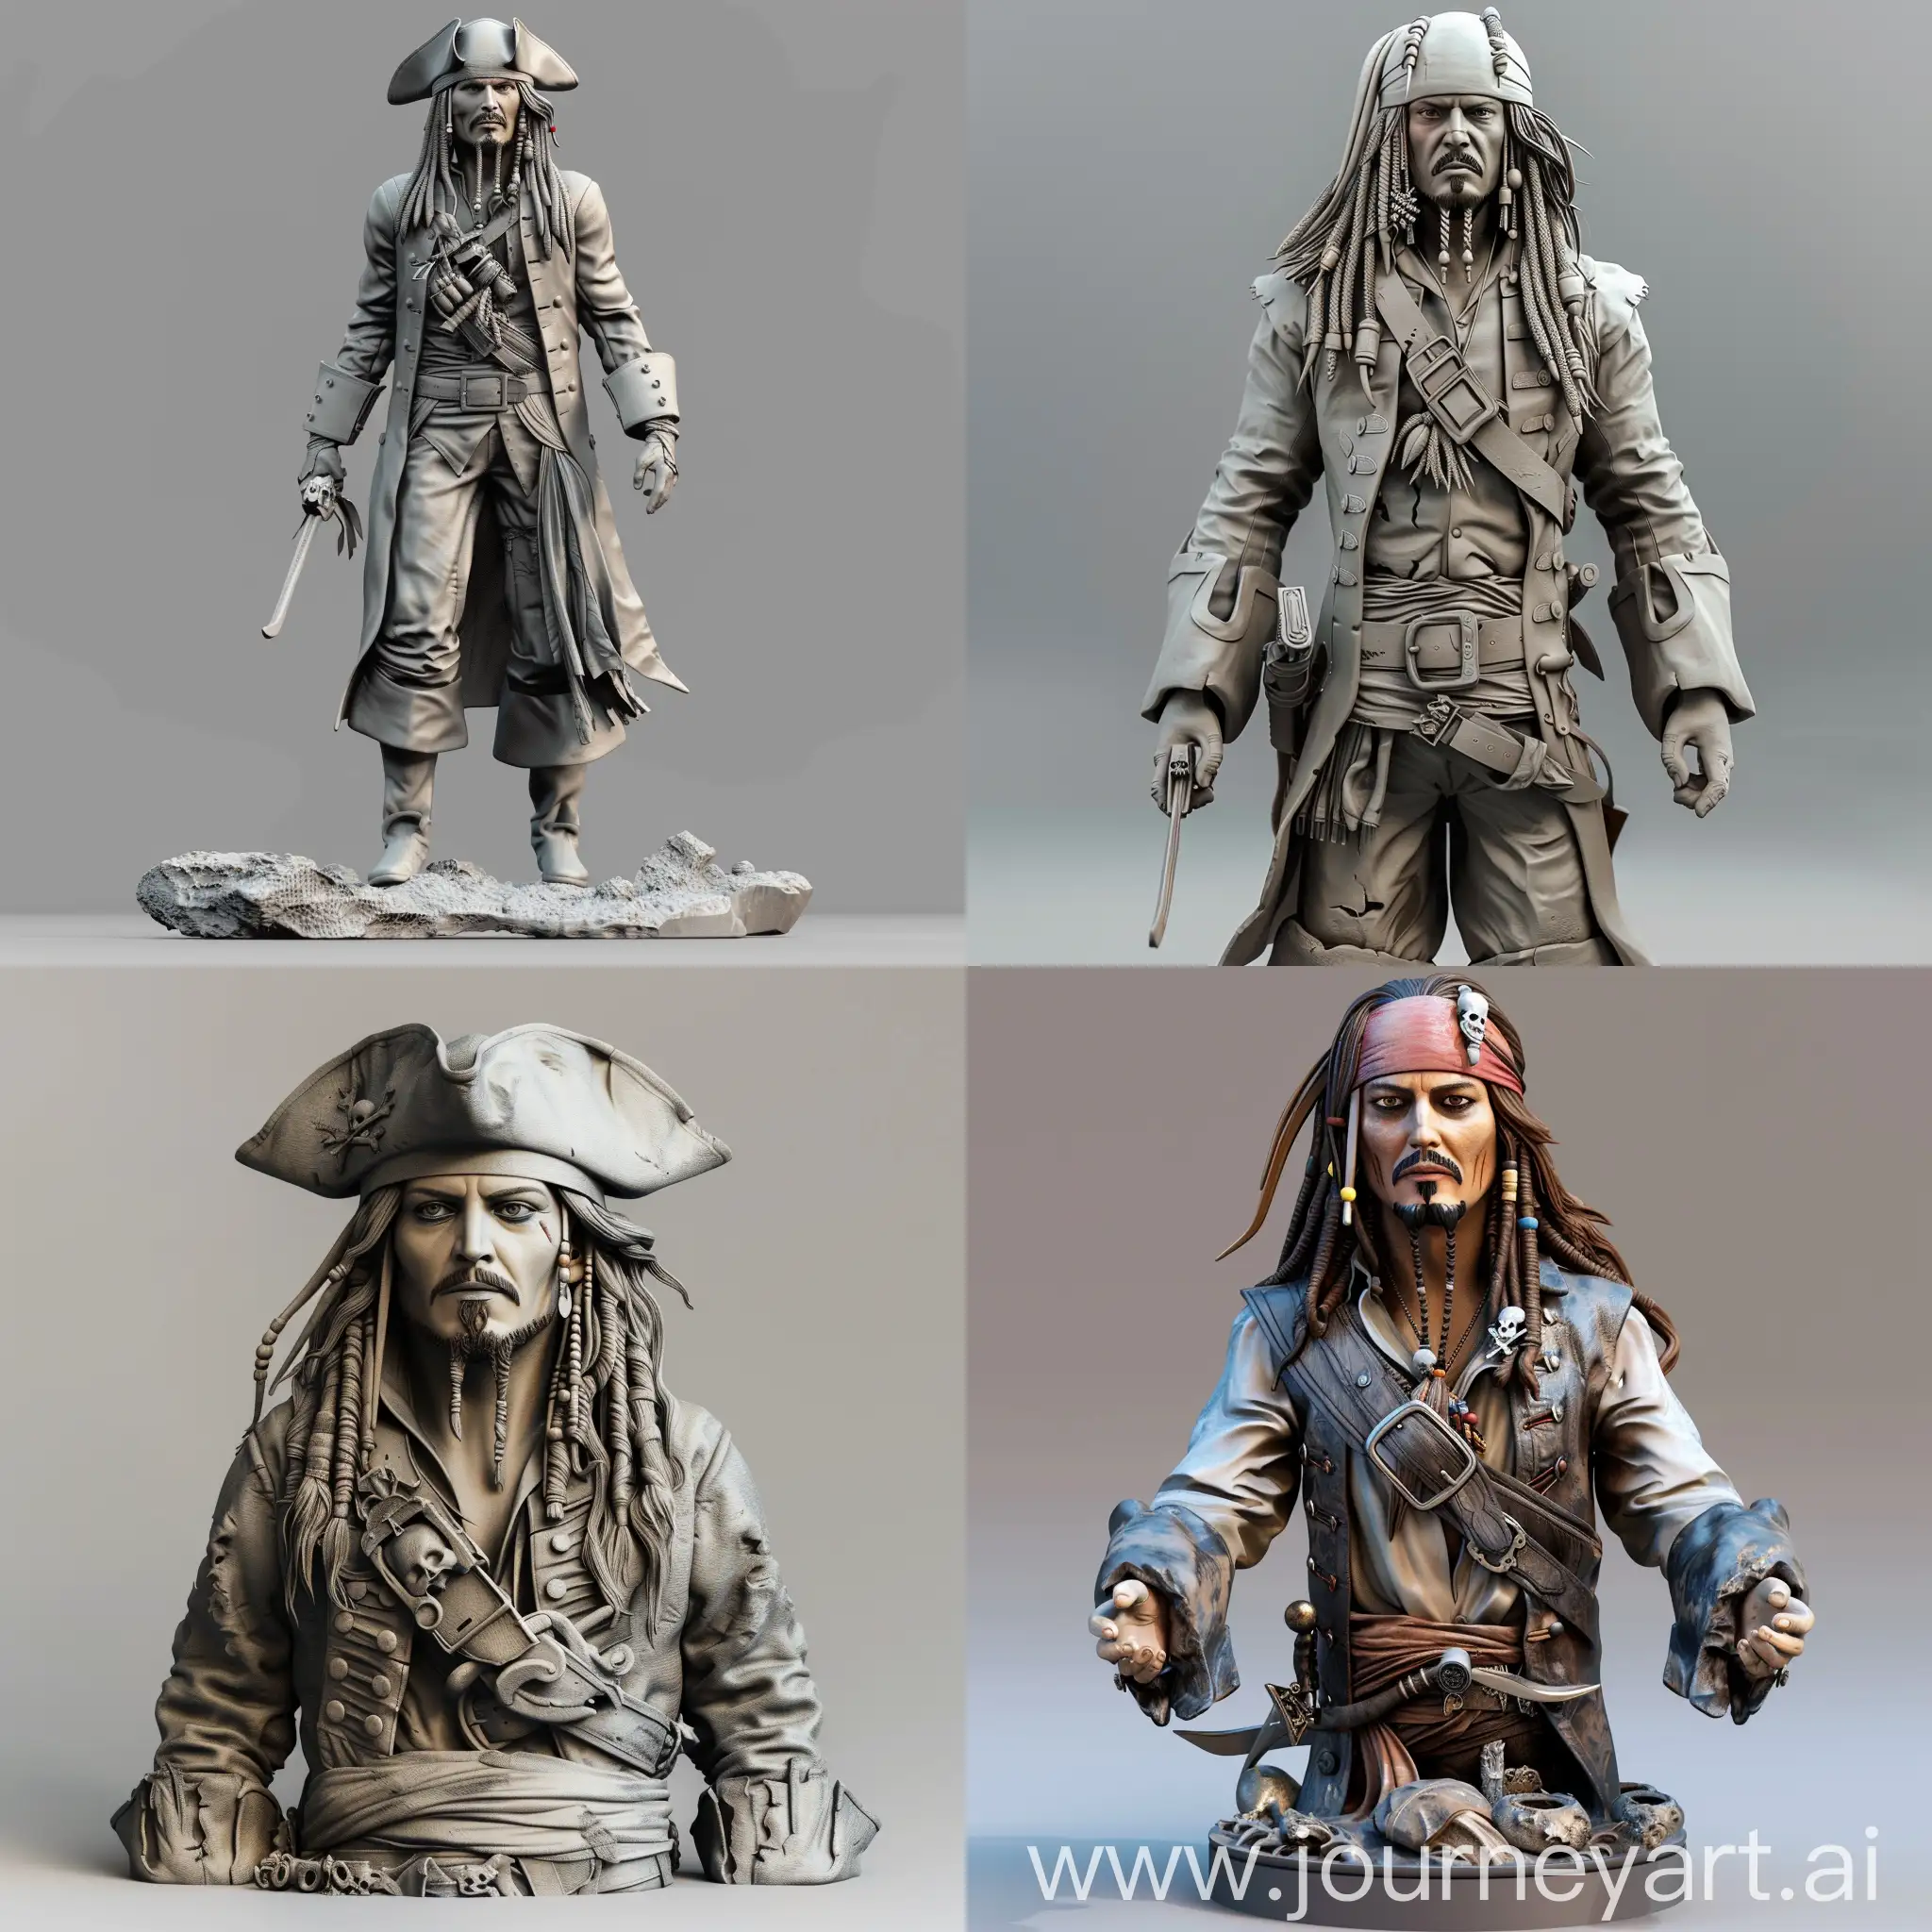 front viwe of three-quarter body of 3D Jack Sparrow in Pirates of the Caribbean movie